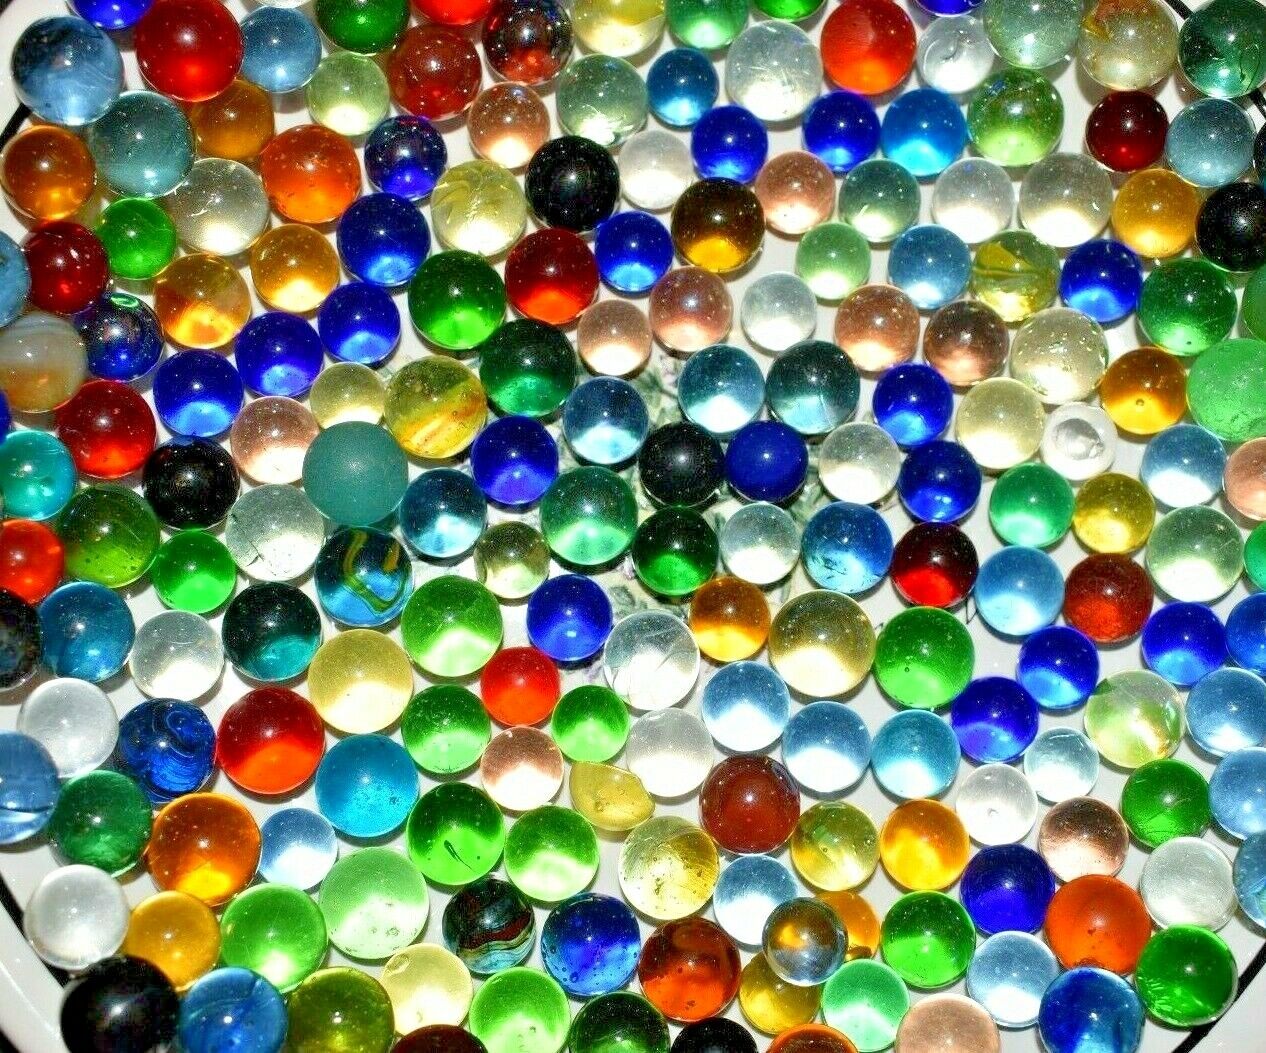 Collectors Mixed Clear Colored Marbles Lot of 50 Size .625" / 5/8"  + or - Unbranded